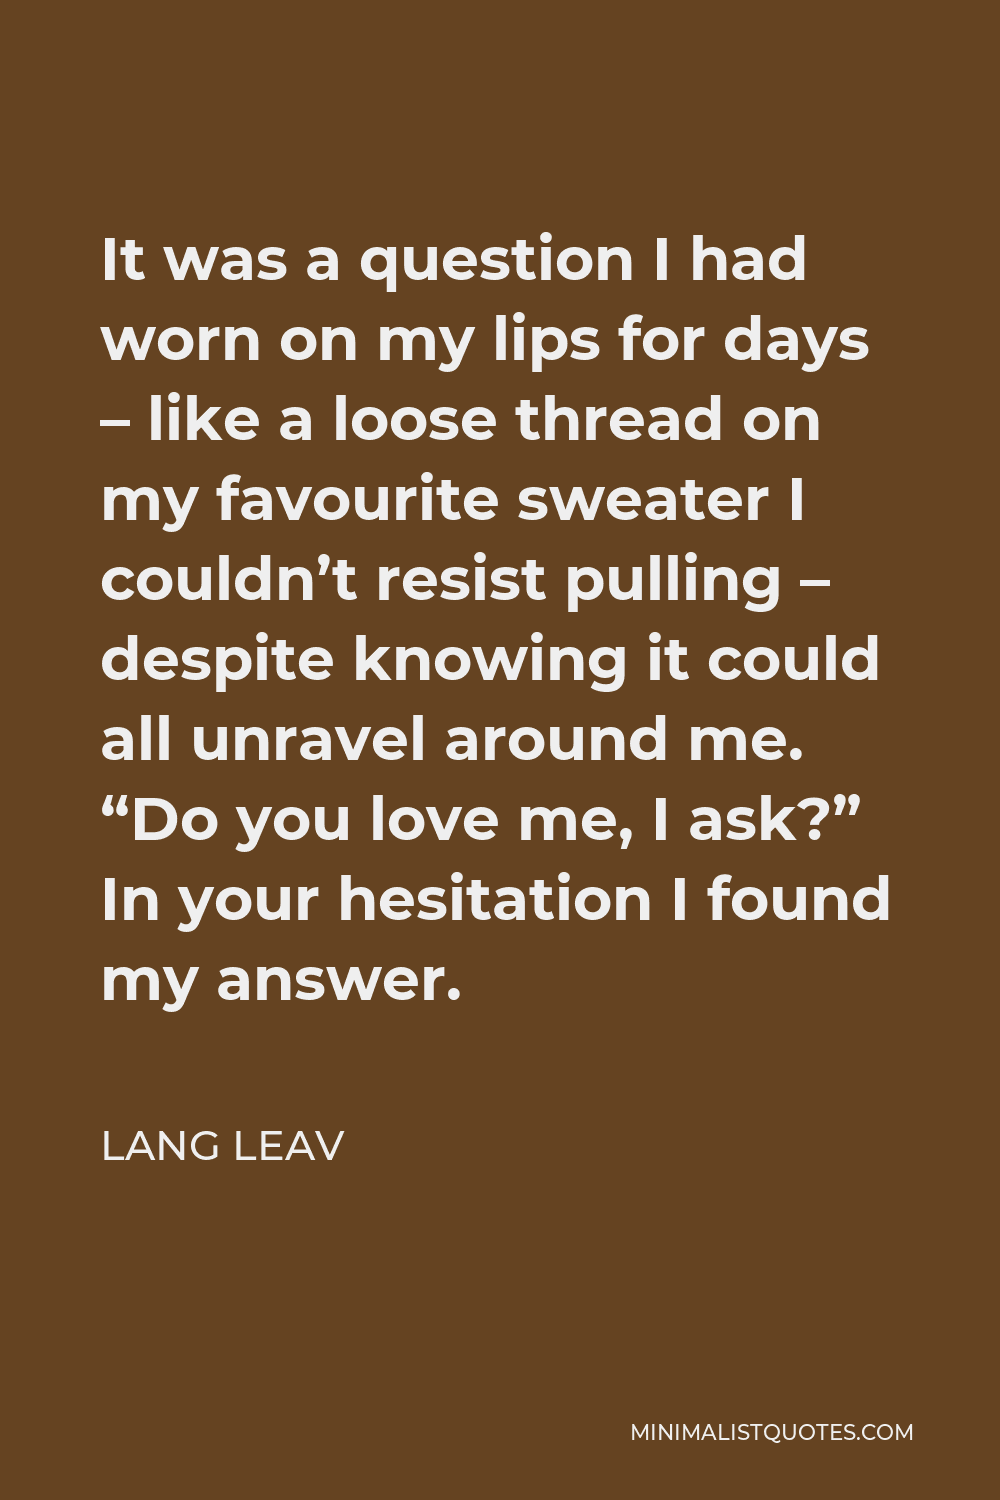 Lang Leav Quote - It was a question I had worn on my lips for days – like a loose thread on my favourite sweater I couldn’t resist pulling – despite knowing it could all unravel around me. “Do you love me, I ask?” In your hesitation I found my answer.